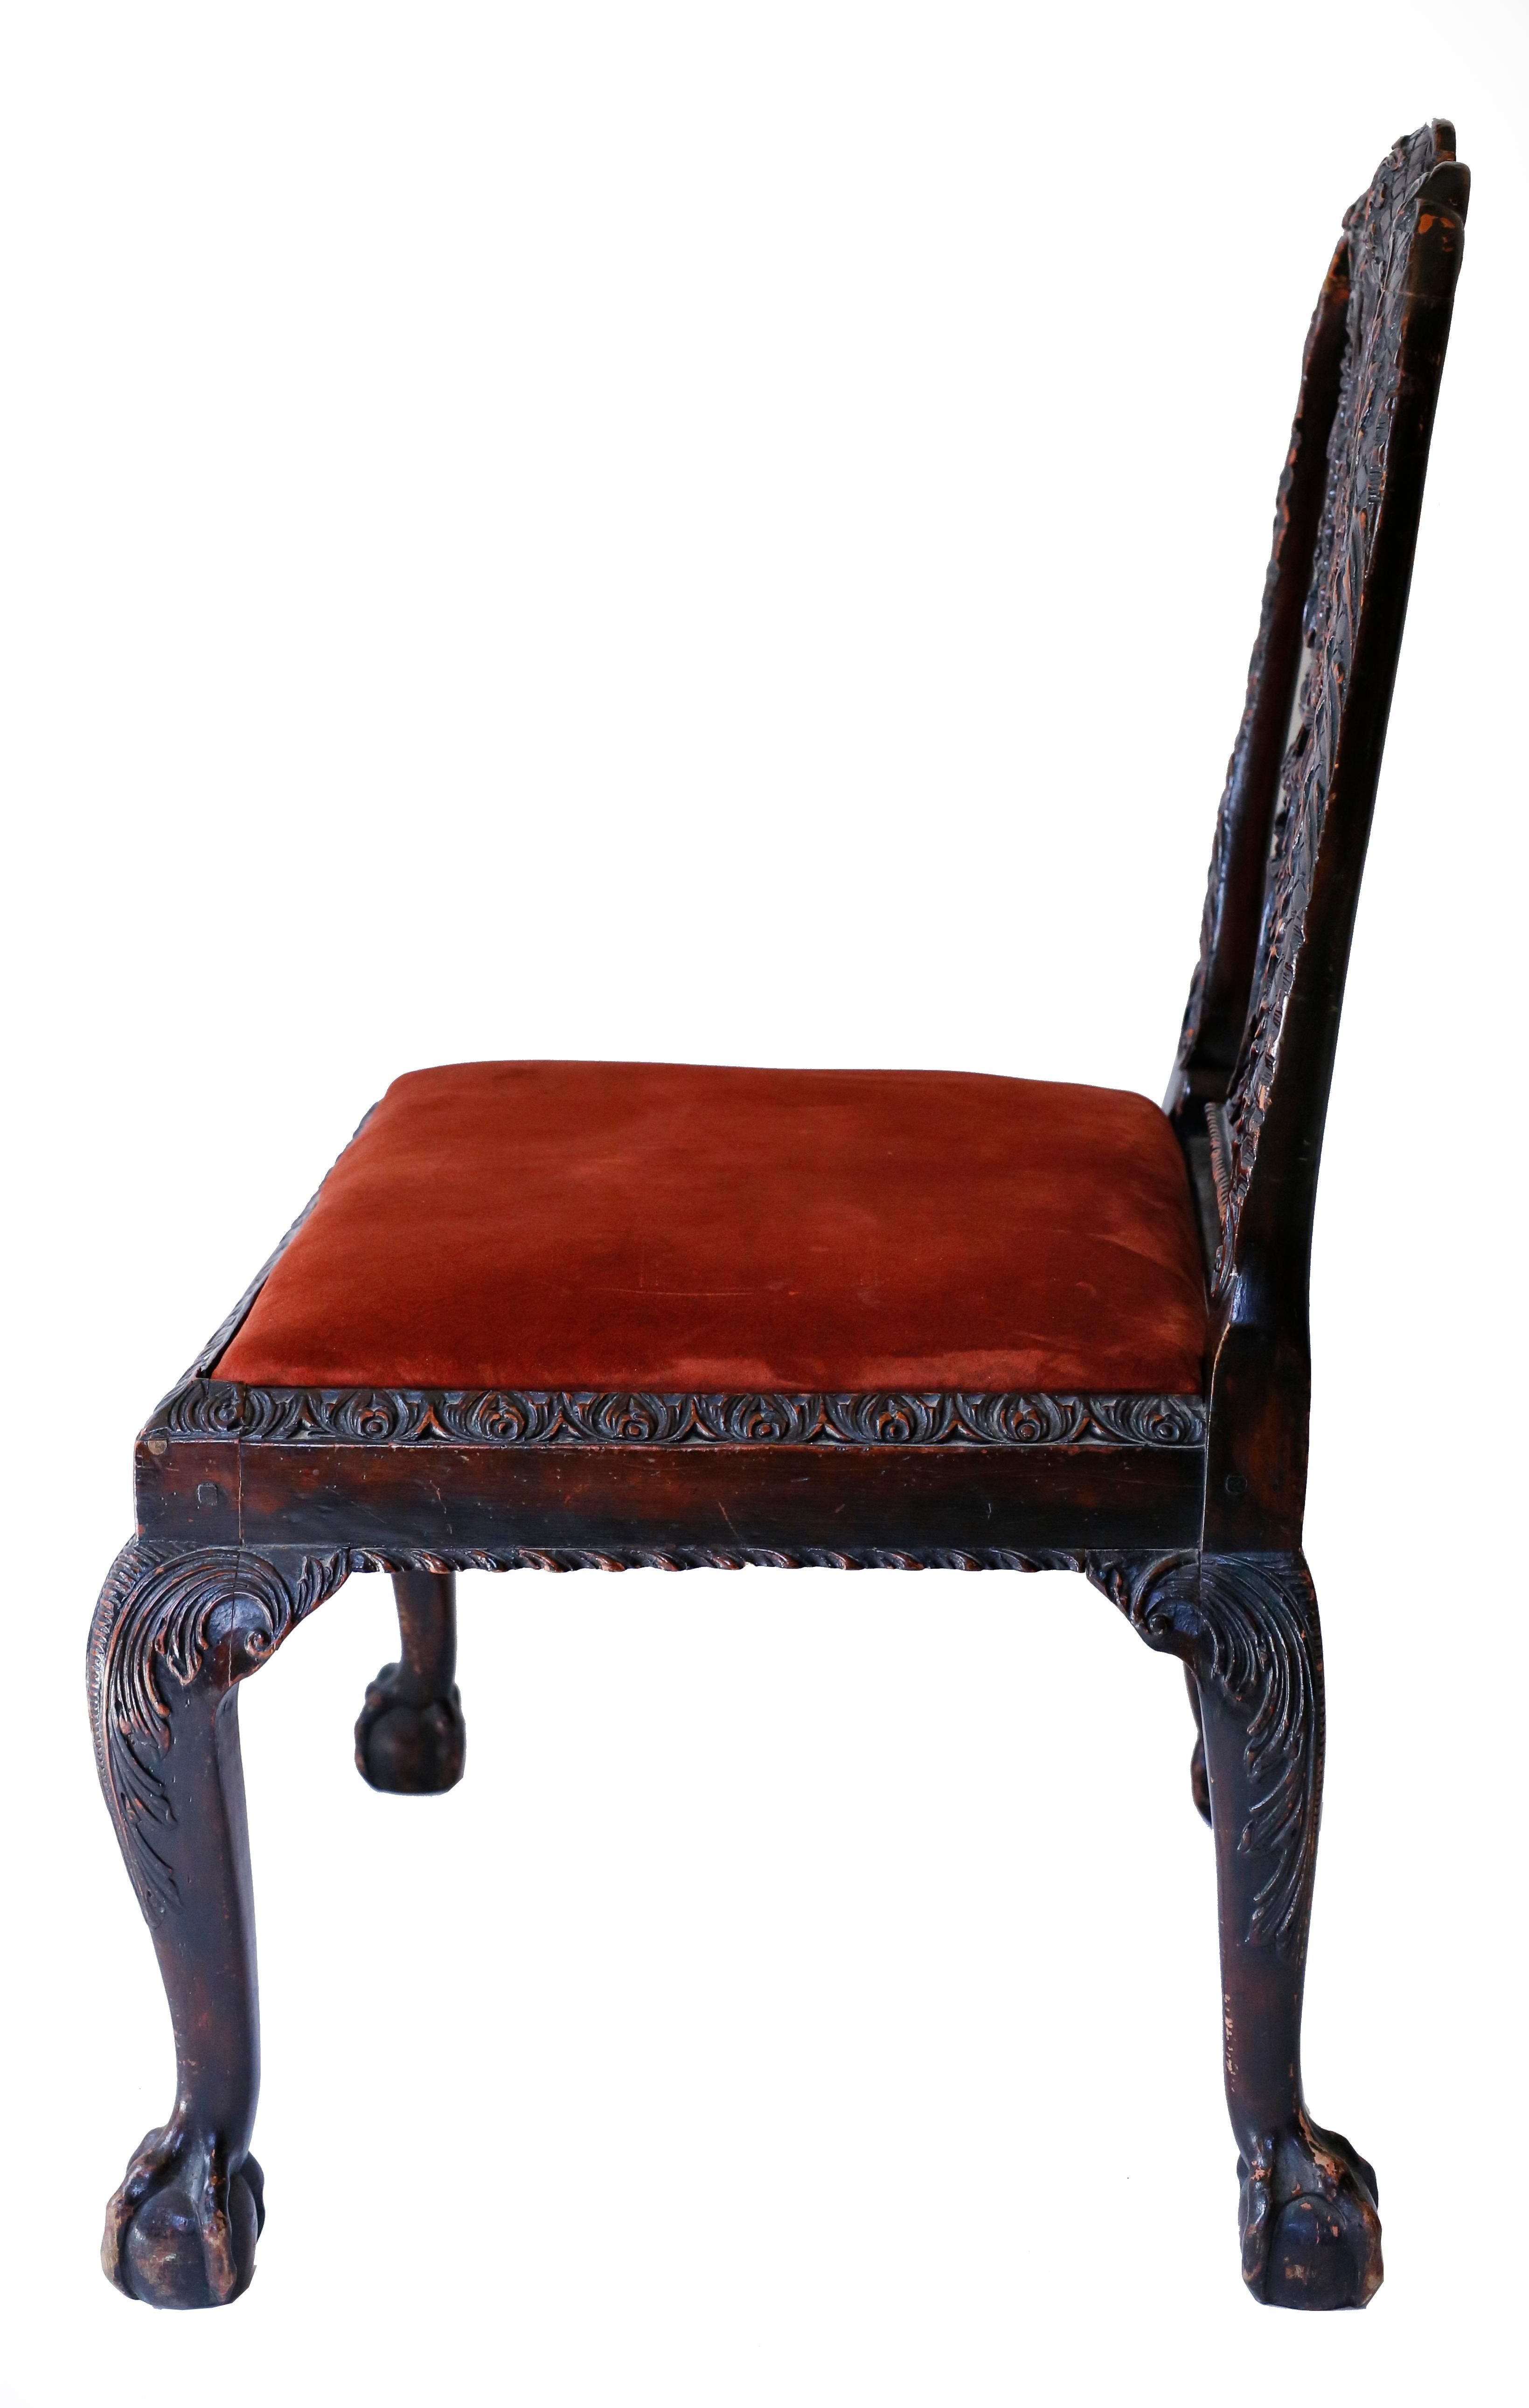 Faux Bois Pair of Chippendale Style Ribbonback Chairs